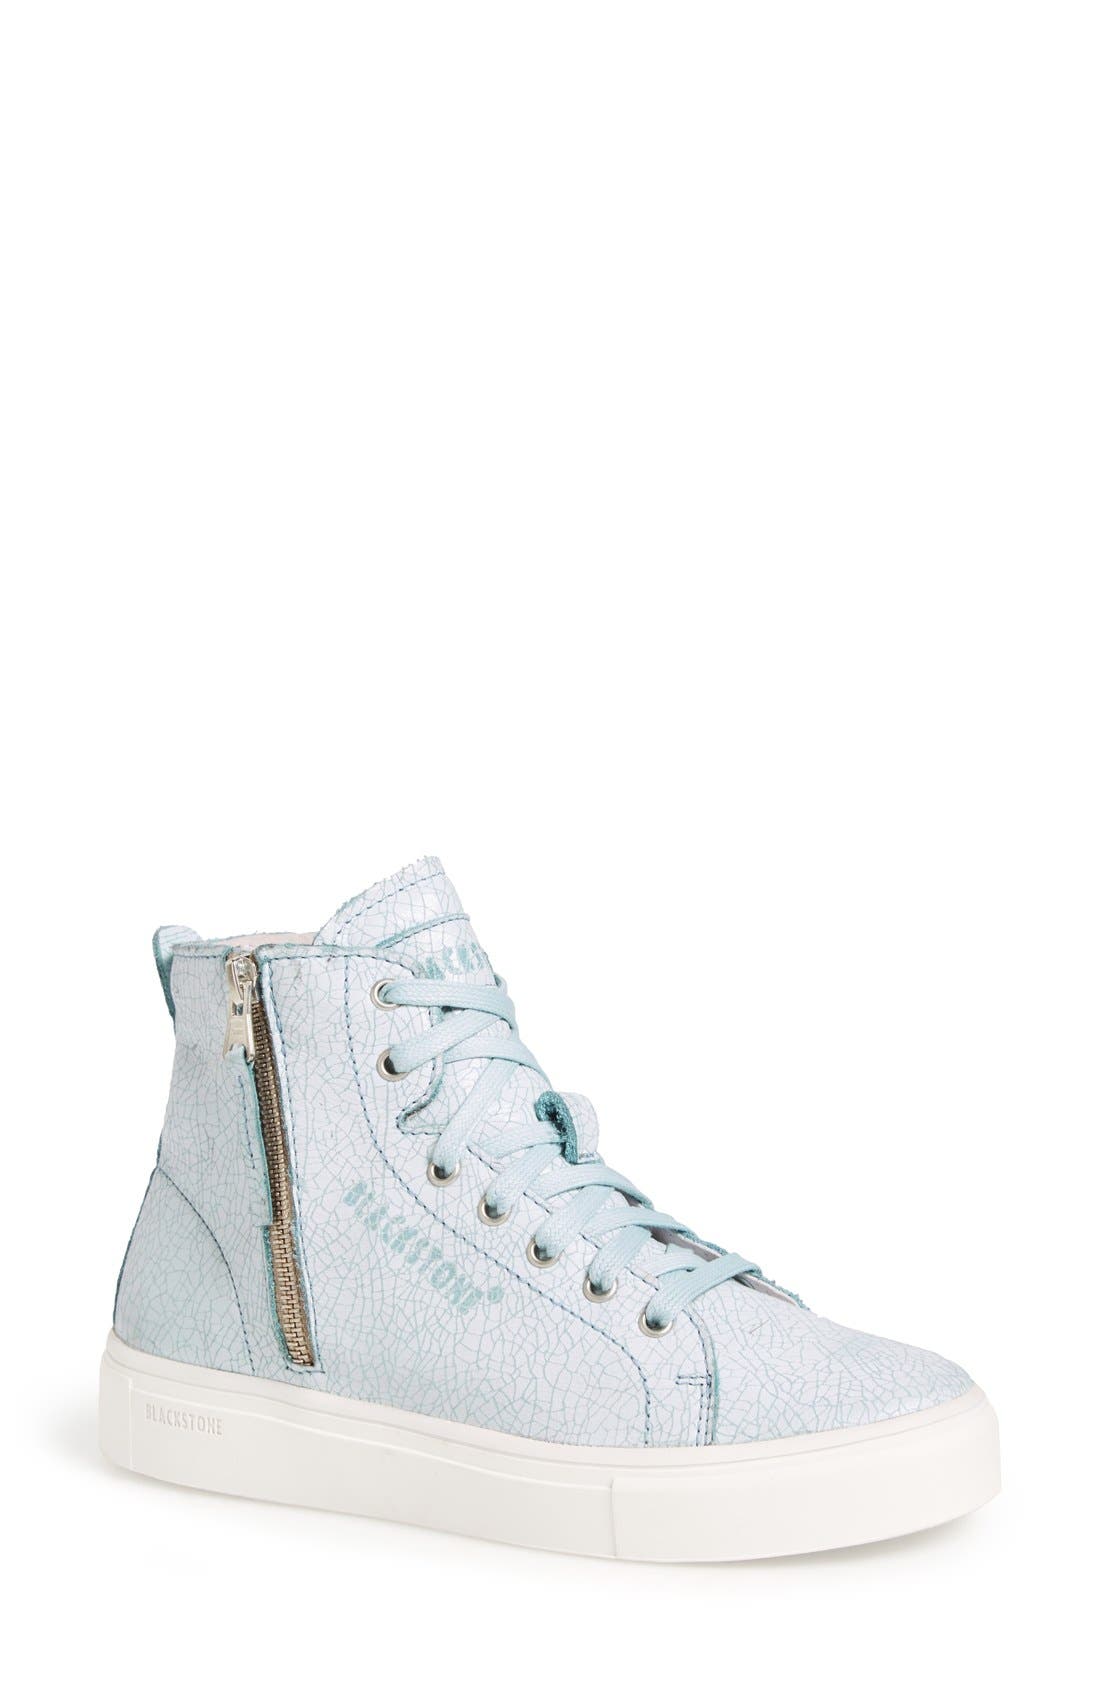 chunky sneakers nordstrom